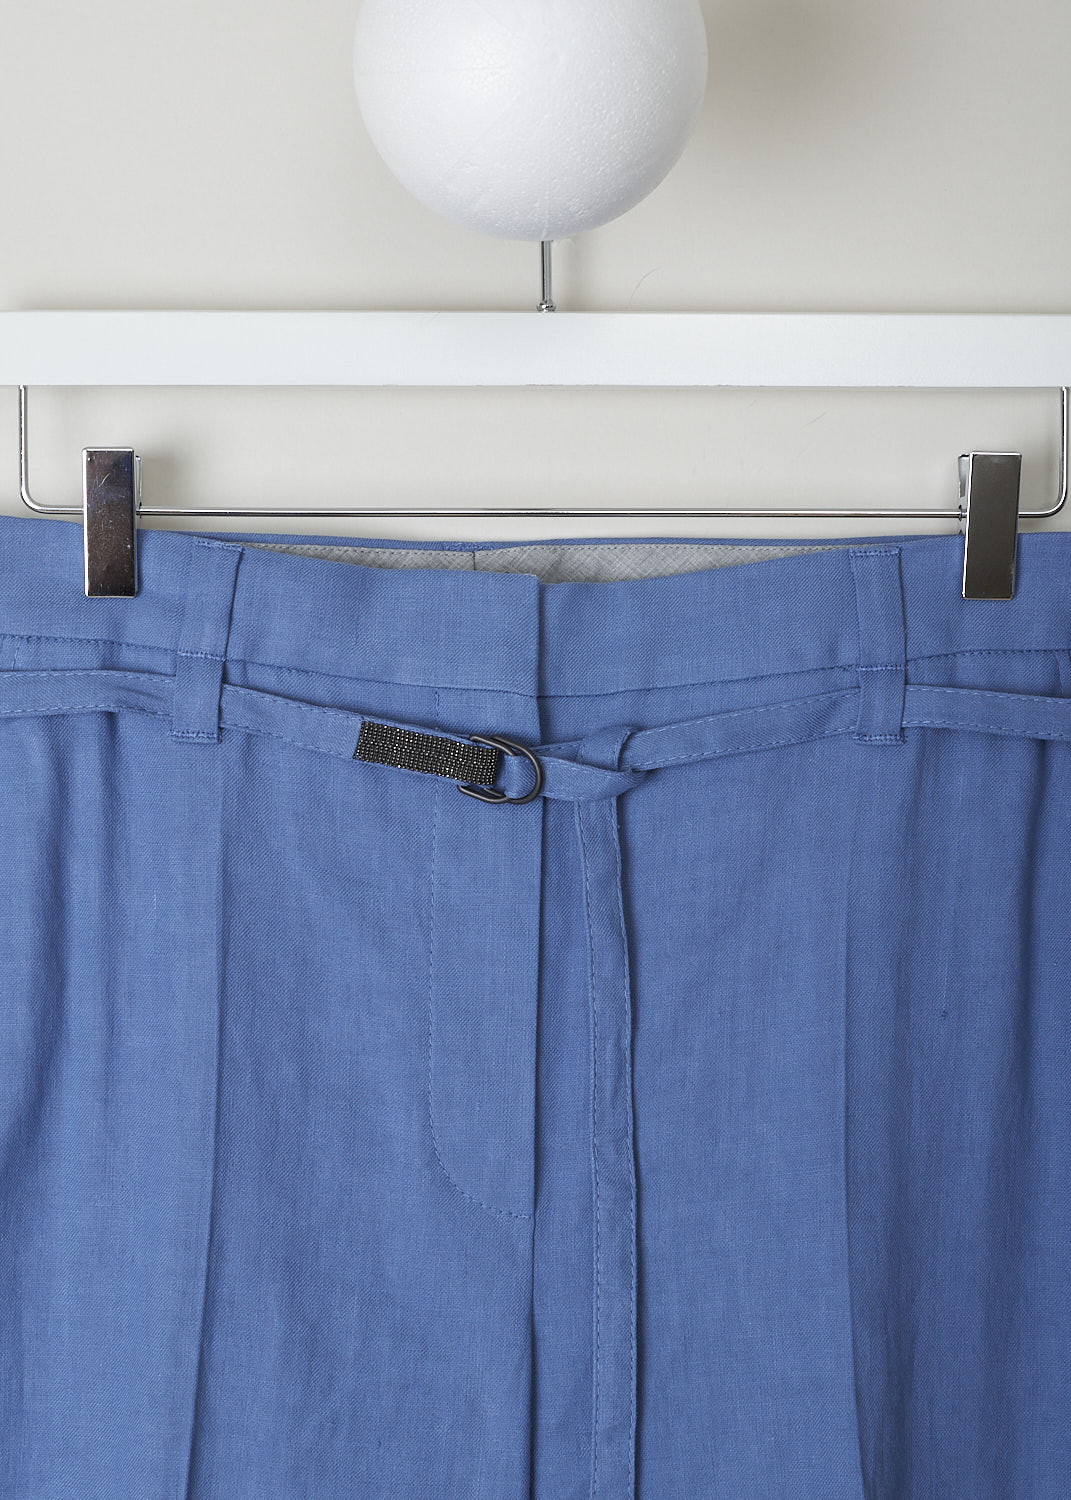 BRUNELLO CUCINELLI, BLUE LINEN PANTS WITH MATCHING BELT, MF591P7453_C8593, Blue, Detail, These blue linen pants have a concealed clasp and zipper closure and a matching fabric belt with a double D-ring buckle. The belt is subtly decorated with Monilli beads. These pants have a pleated front and tapered pant legs with centre creases. In the front, slanted pockets can be found. In the back, these pants have welt pockets. 
